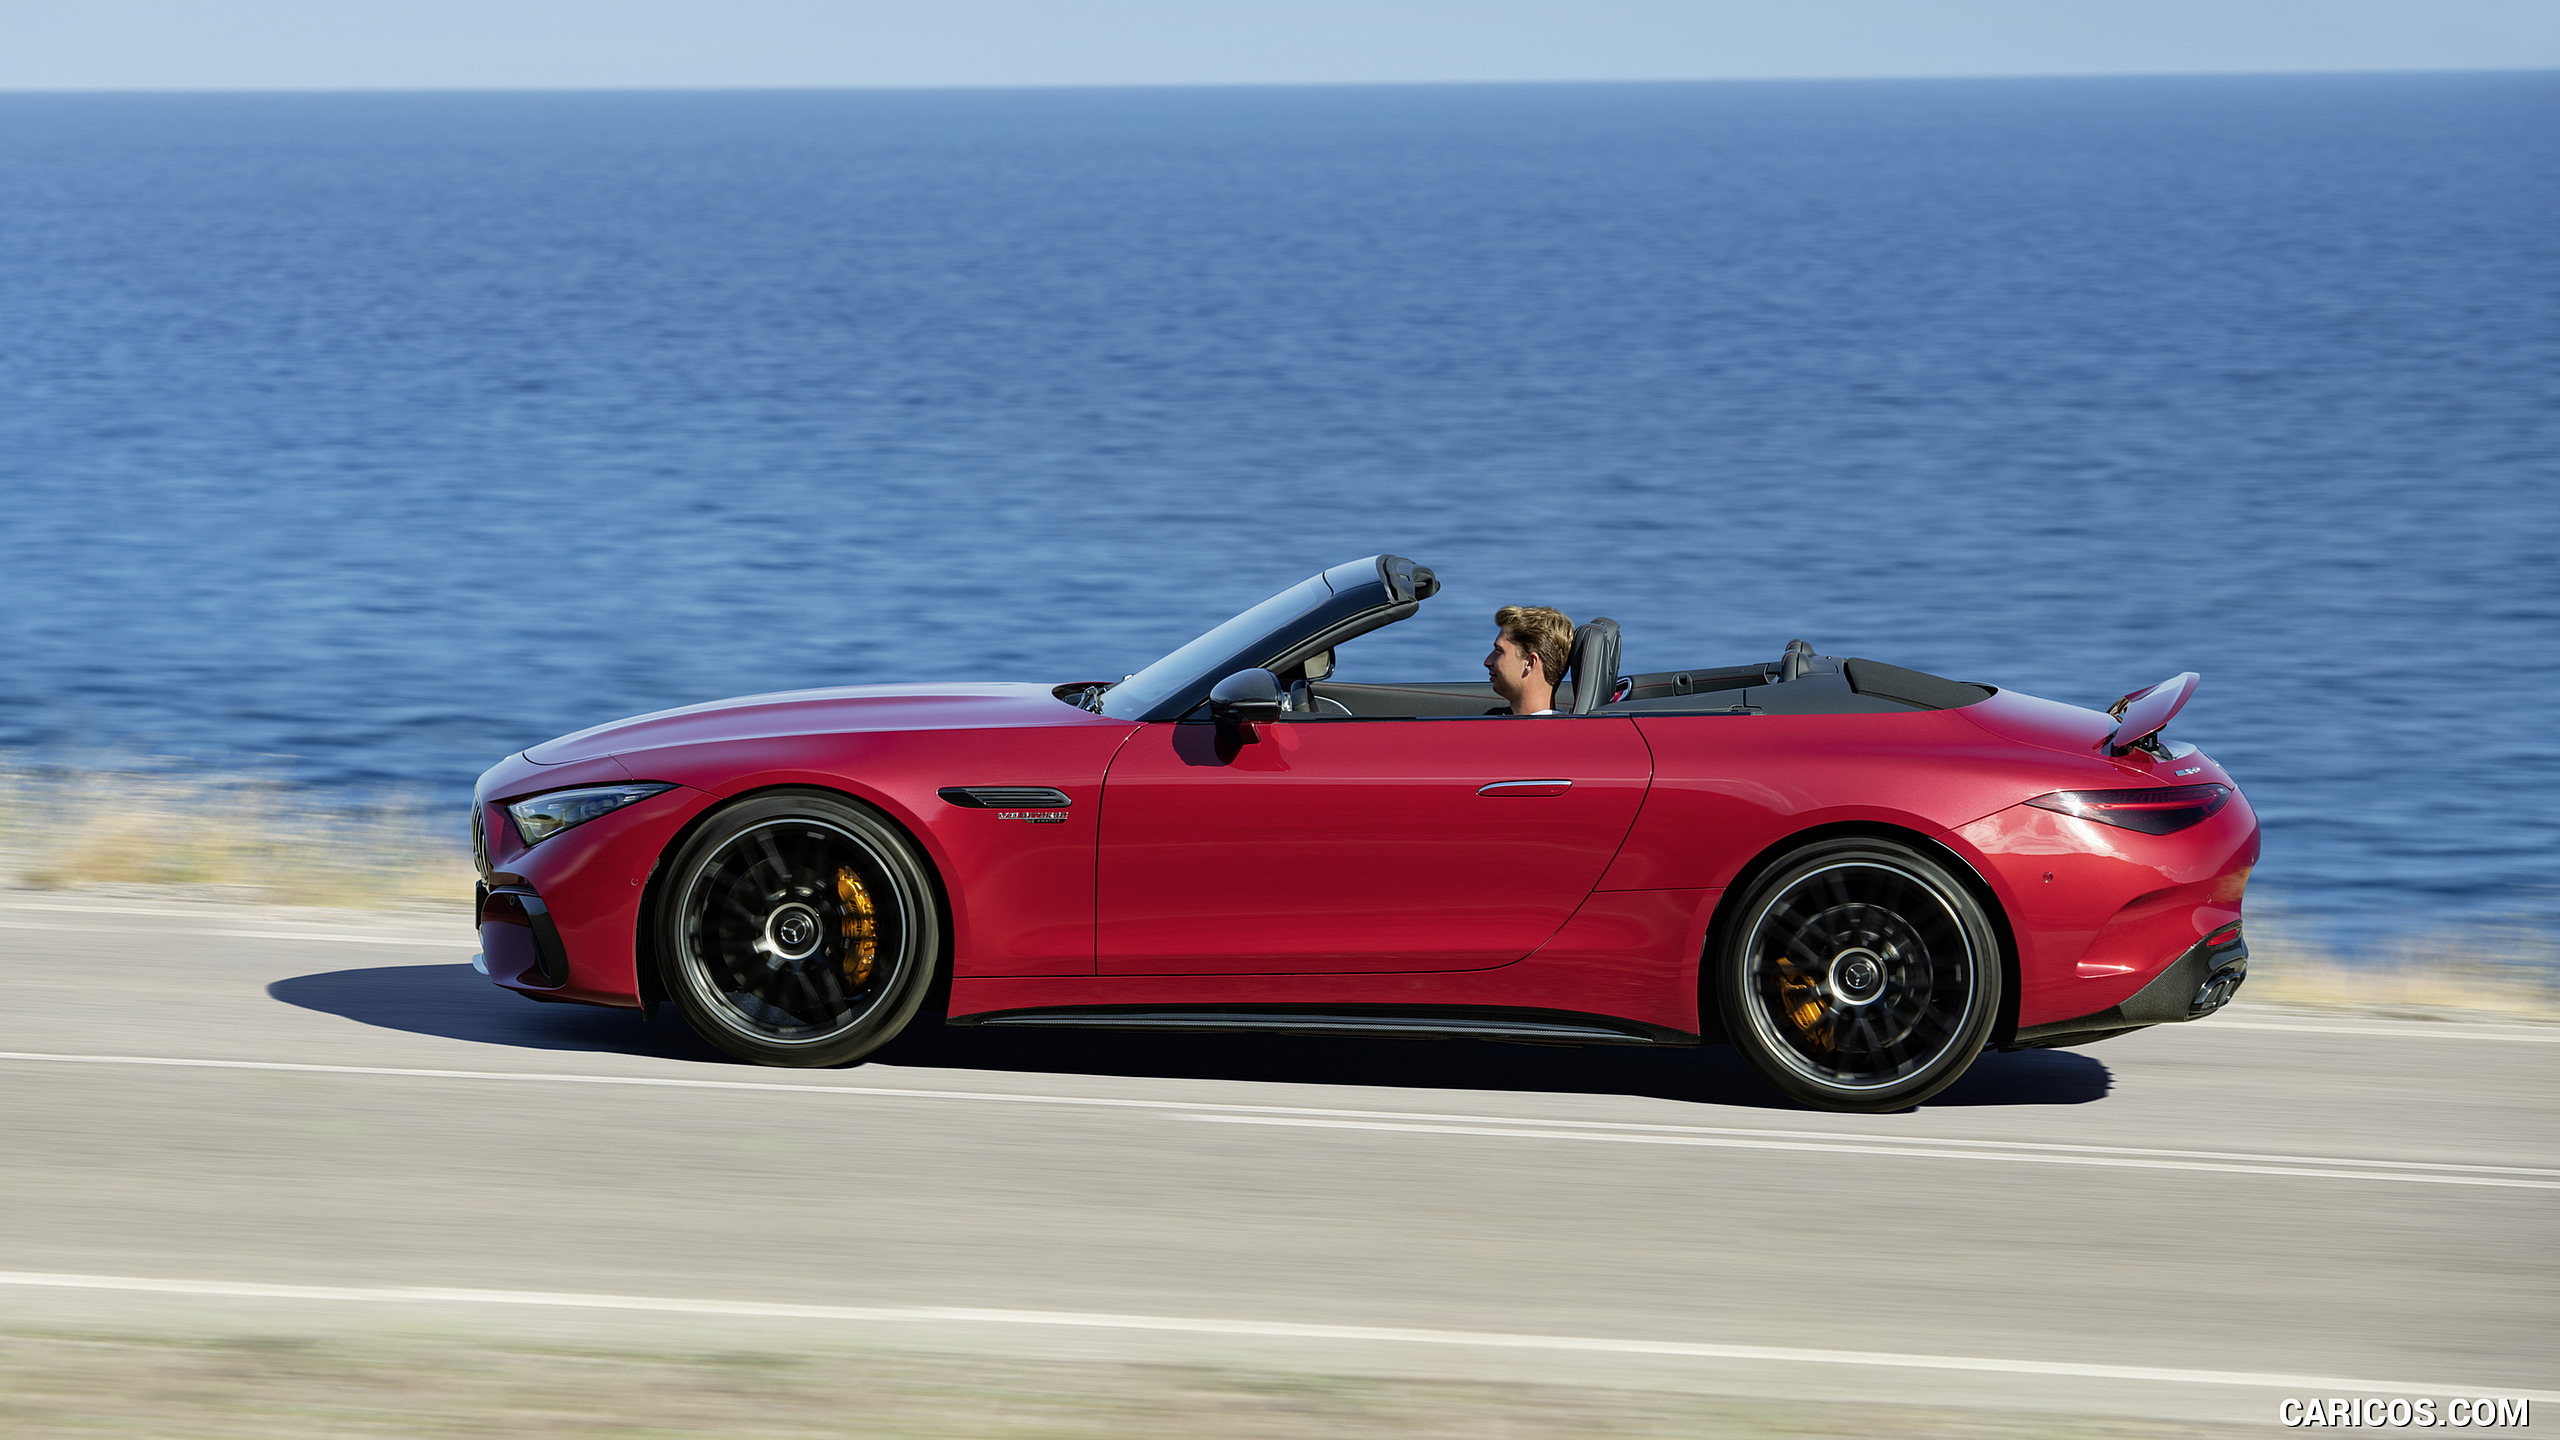 2022 Mercedes-AMG SL 63 4MATIC+ (Color: Patagonia Red Metallic) - Side, #2 of 235